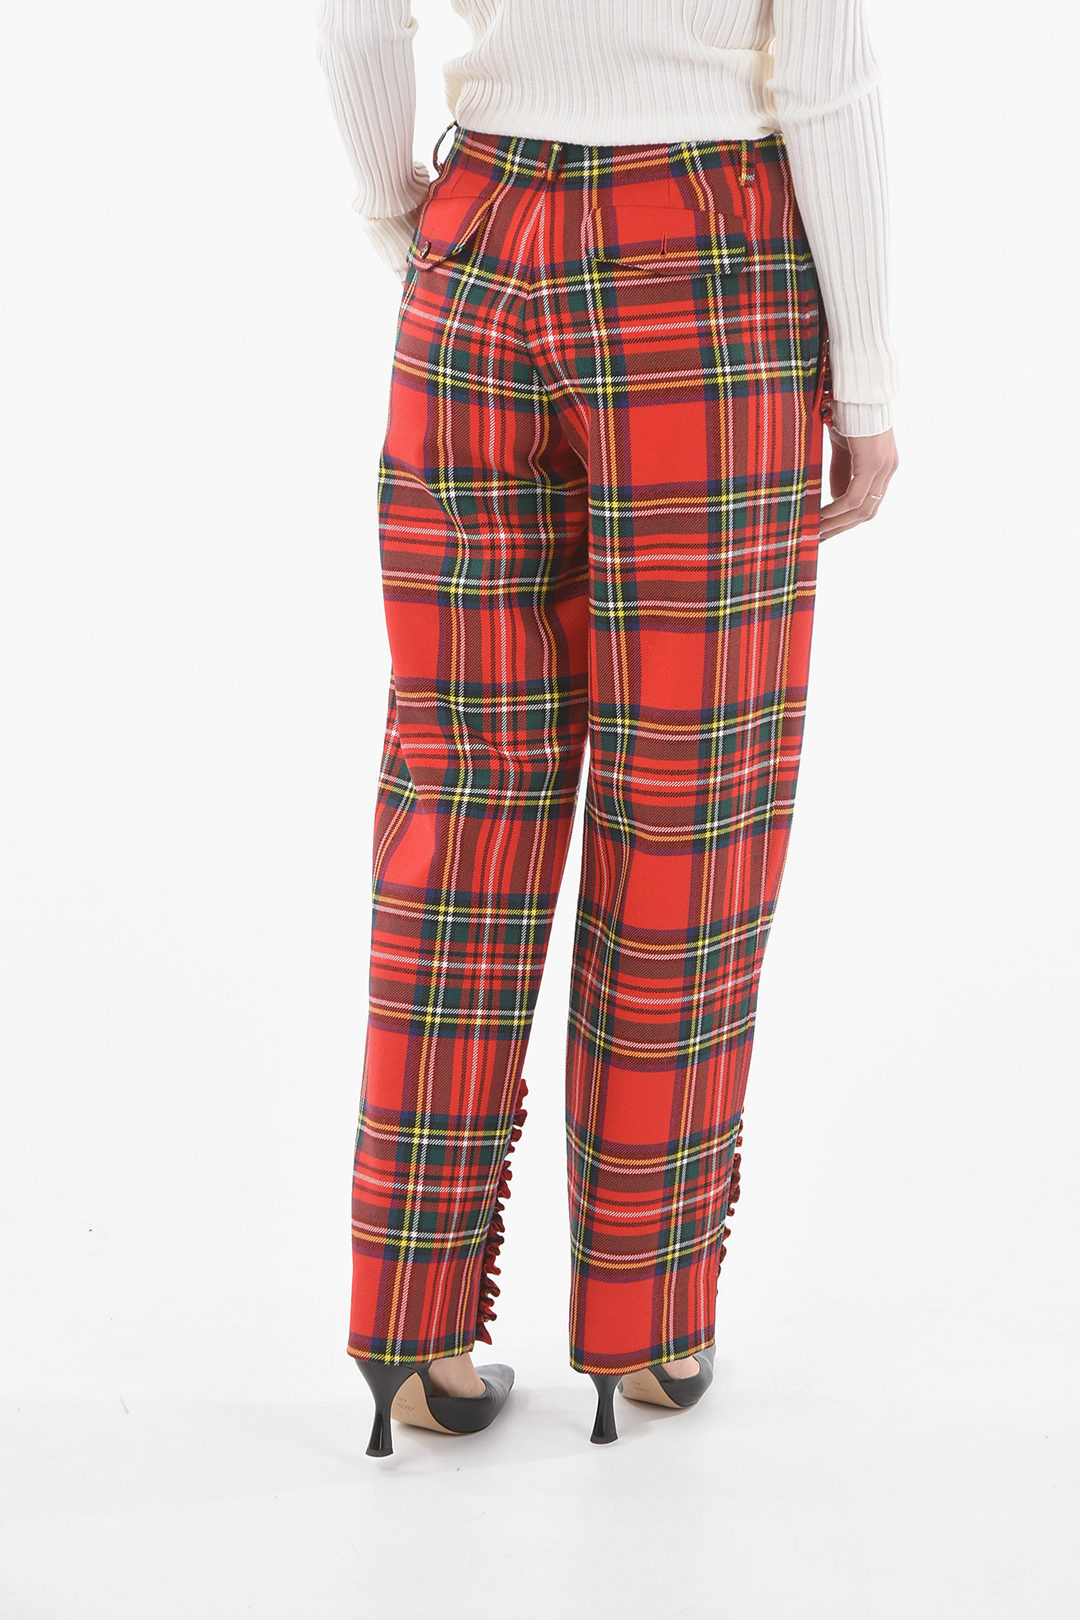 Innocence Light Grey Check Jacquard Slim Leg Trousers New Look  Compare   Union Square Aberdeen Shopping Centre